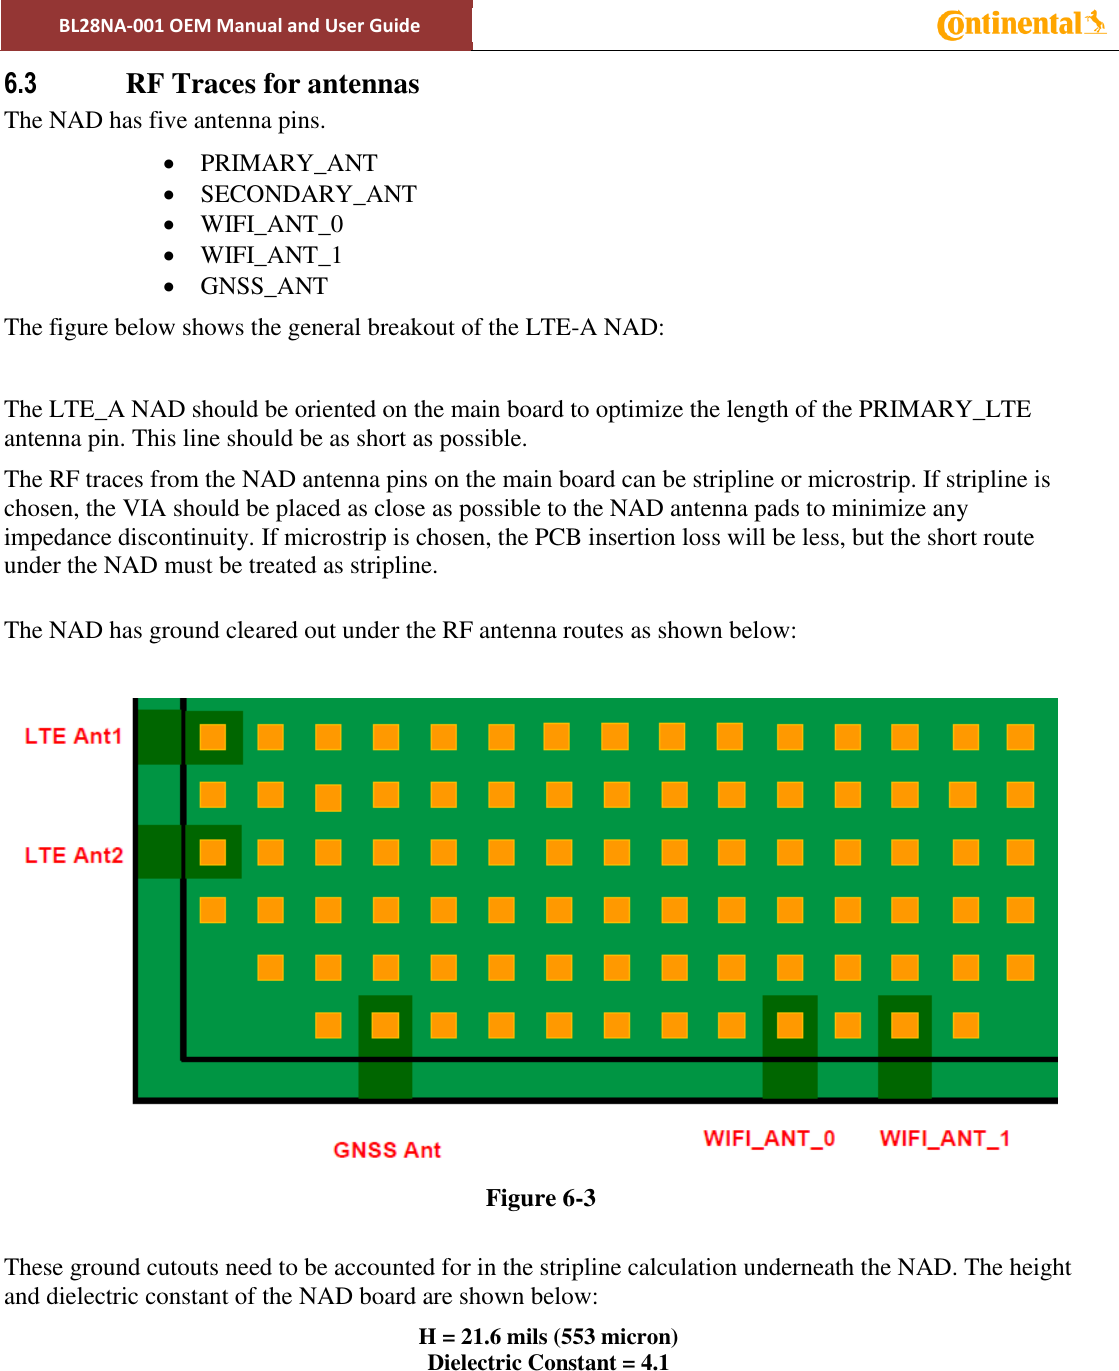 BL28NA-001 OEM Manual and User Guide   6.3 RF Traces for antennas The NAD has five antenna pins.  PRIMARY_ANT  SECONDARY_ANT  WIFI_ANT_0  WIFI_ANT_1  GNSS_ANT The figure below shows the general breakout of the LTE-A NAD:  The LTE_A NAD should be oriented on the main board to optimize the length of the PRIMARY_LTE antenna pin. This line should be as short as possible.  The RF traces from the NAD antenna pins on the main board can be stripline or microstrip. If stripline is chosen, the VIA should be placed as close as possible to the NAD antenna pads to minimize any impedance discontinuity. If microstrip is chosen, the PCB insertion loss will be less, but the short route under the NAD must be treated as stripline.   The NAD has ground cleared out under the RF antenna routes as shown below:   Figure 6-3  These ground cutouts need to be accounted for in the stripline calculation underneath the NAD. The height and dielectric constant of the NAD board are shown below: H = 21.6 mils (553 micron) Dielectric Constant = 4.1     